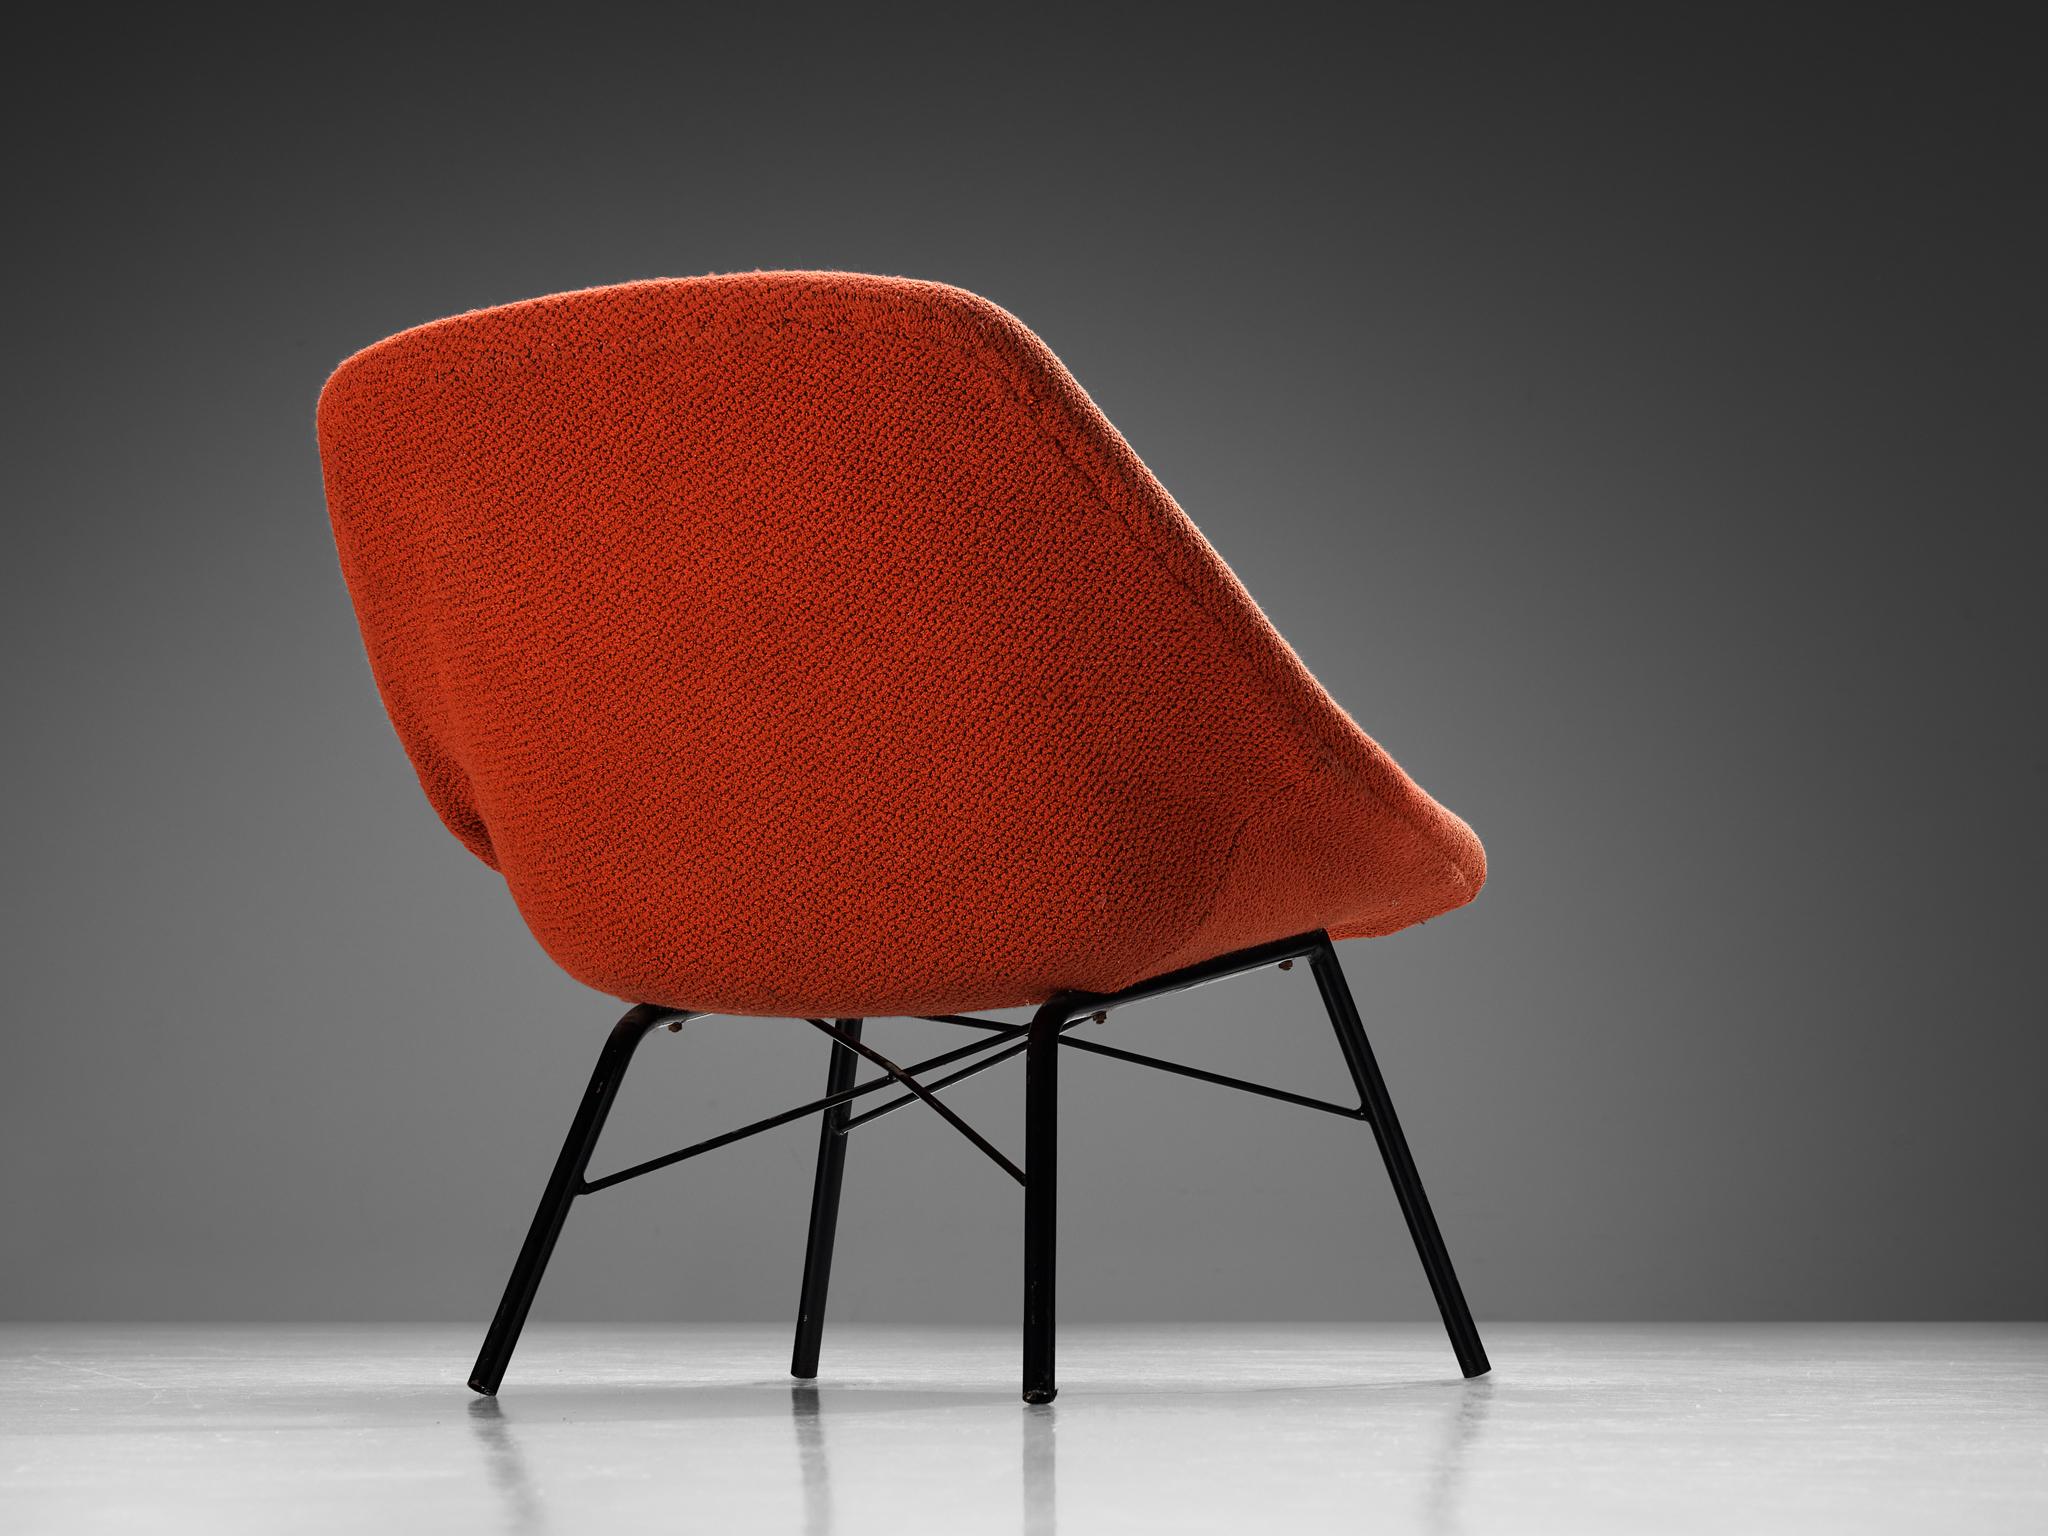 Magda Sépová for TON, lounge chair, fiberglass, fabric, coated steel, Czechoslovakia, 1962

This armchair by Magda Sépová embraces the aesthetic sensibility that prevailed in the 1950s and 1960s. The corpus embodies a dynamic appearance that, for